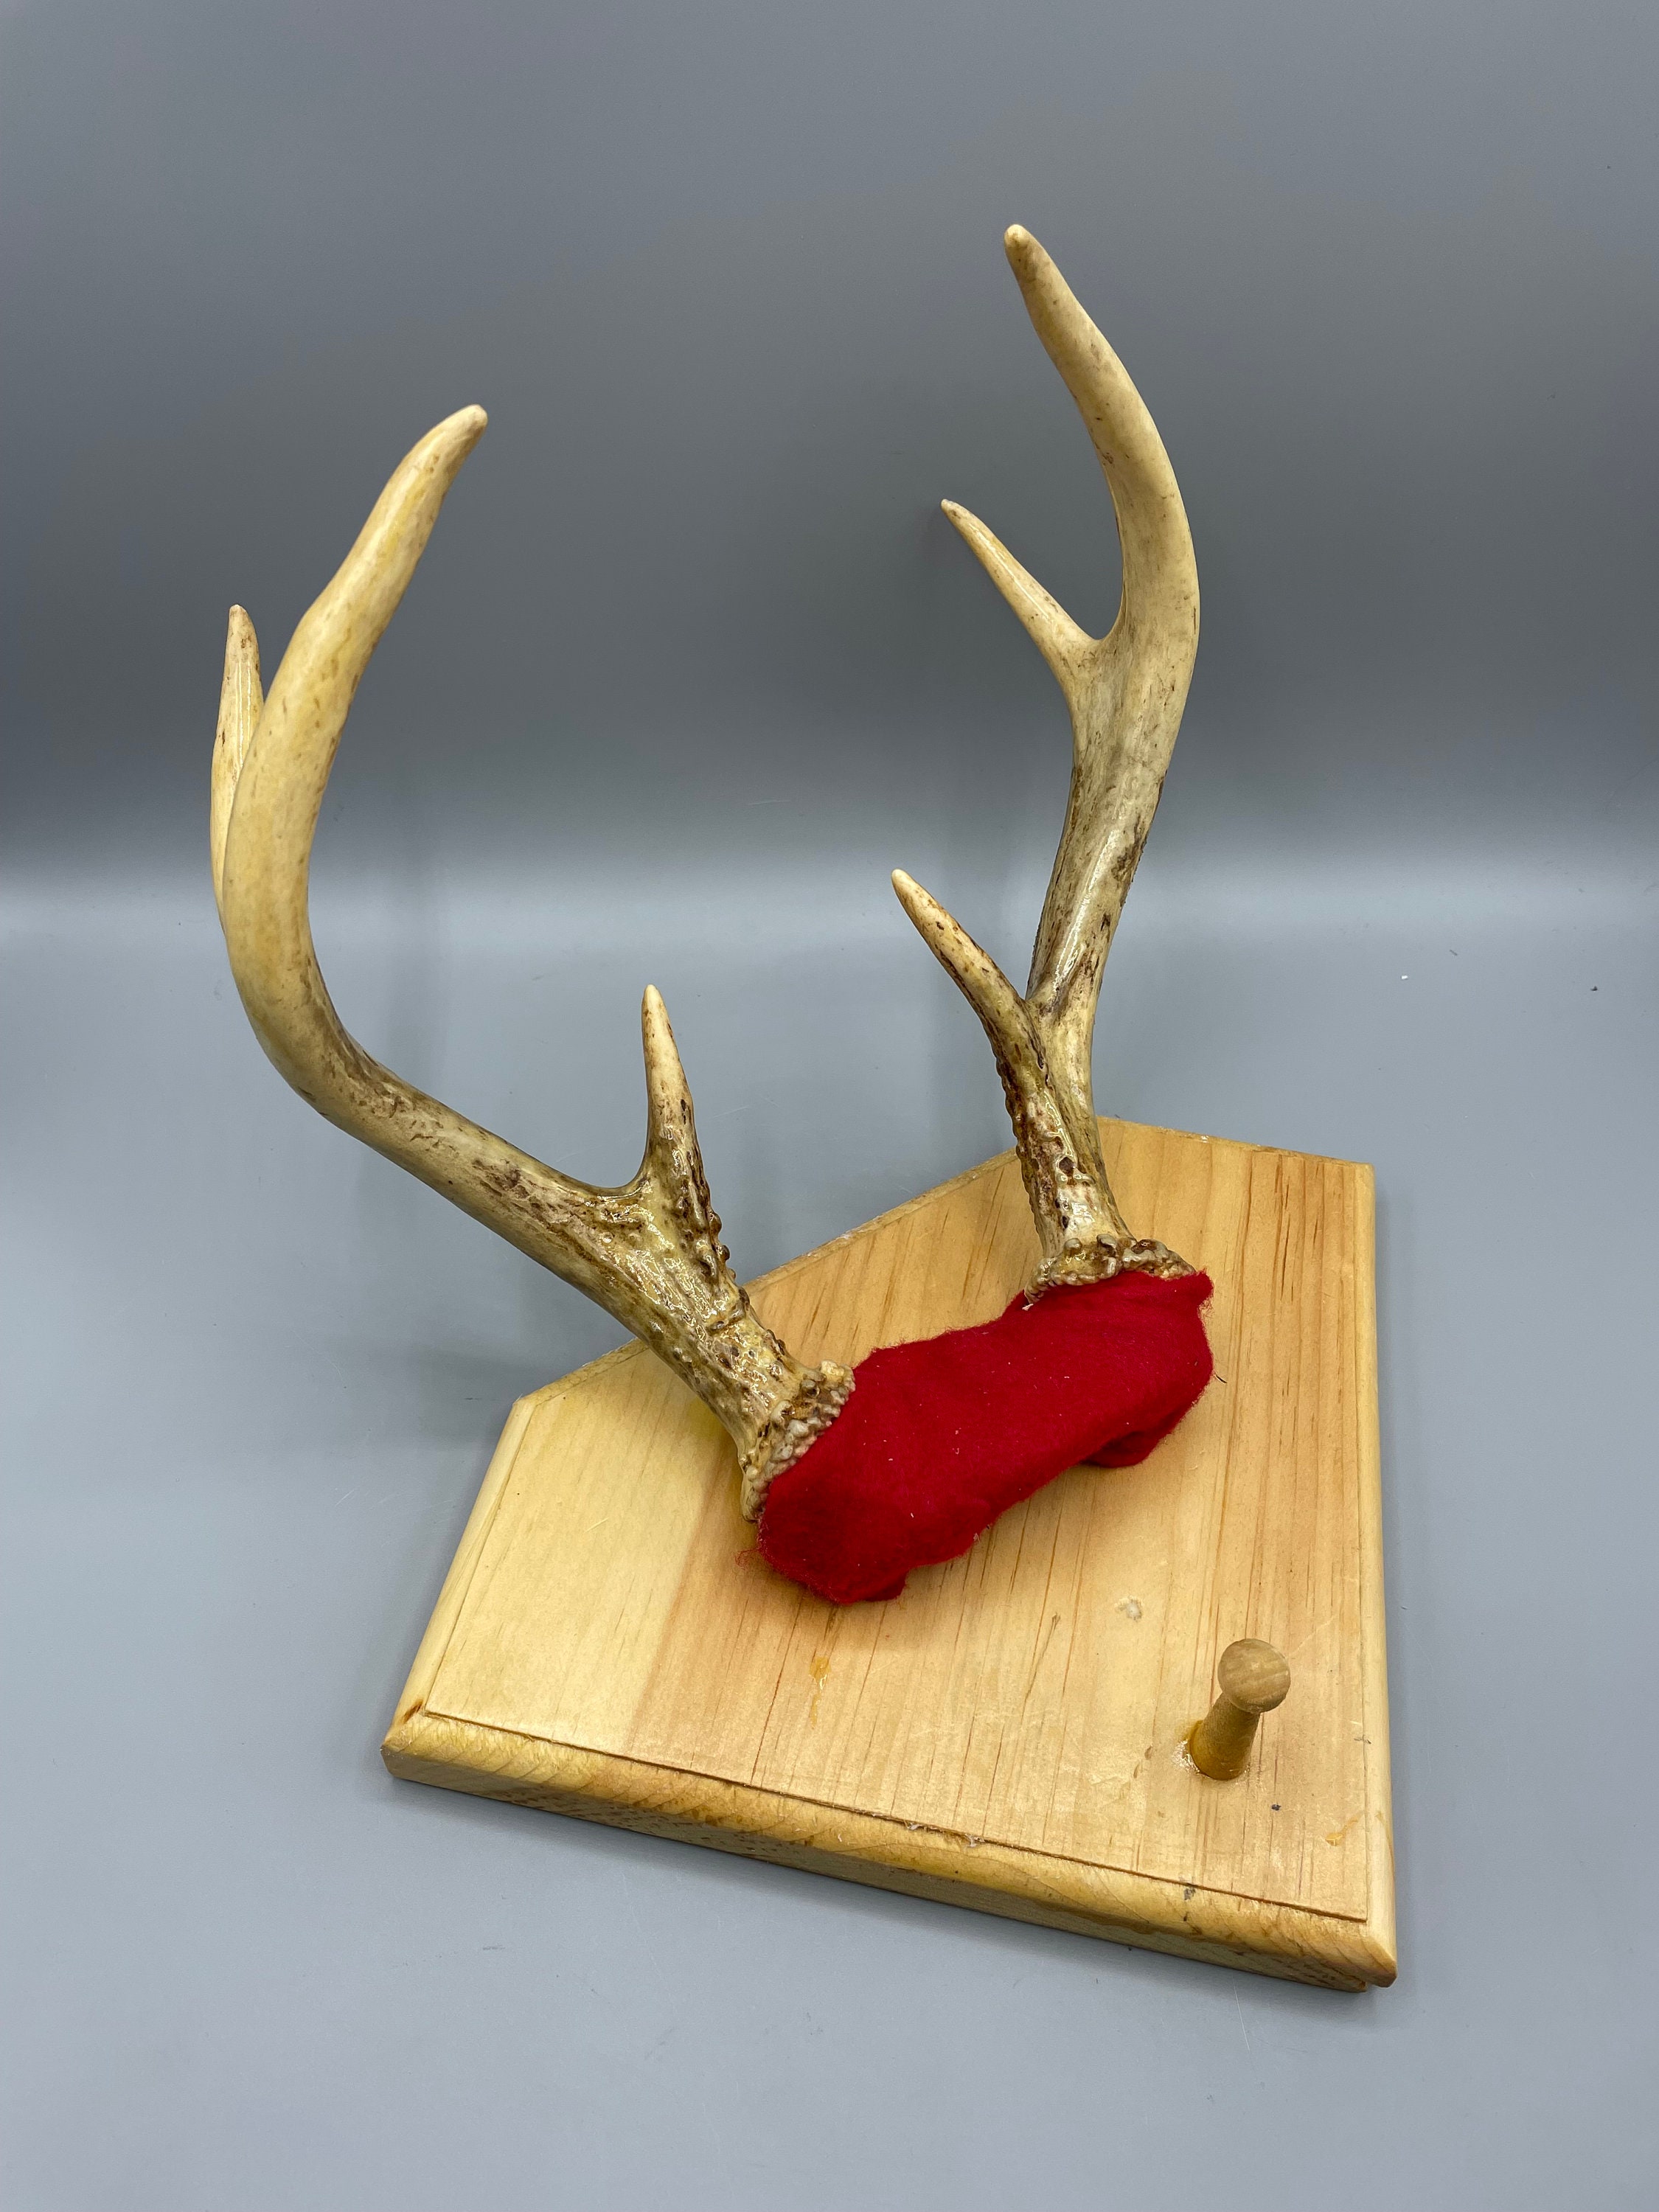 Florida Deer Small Antler Taxidermy with felt back